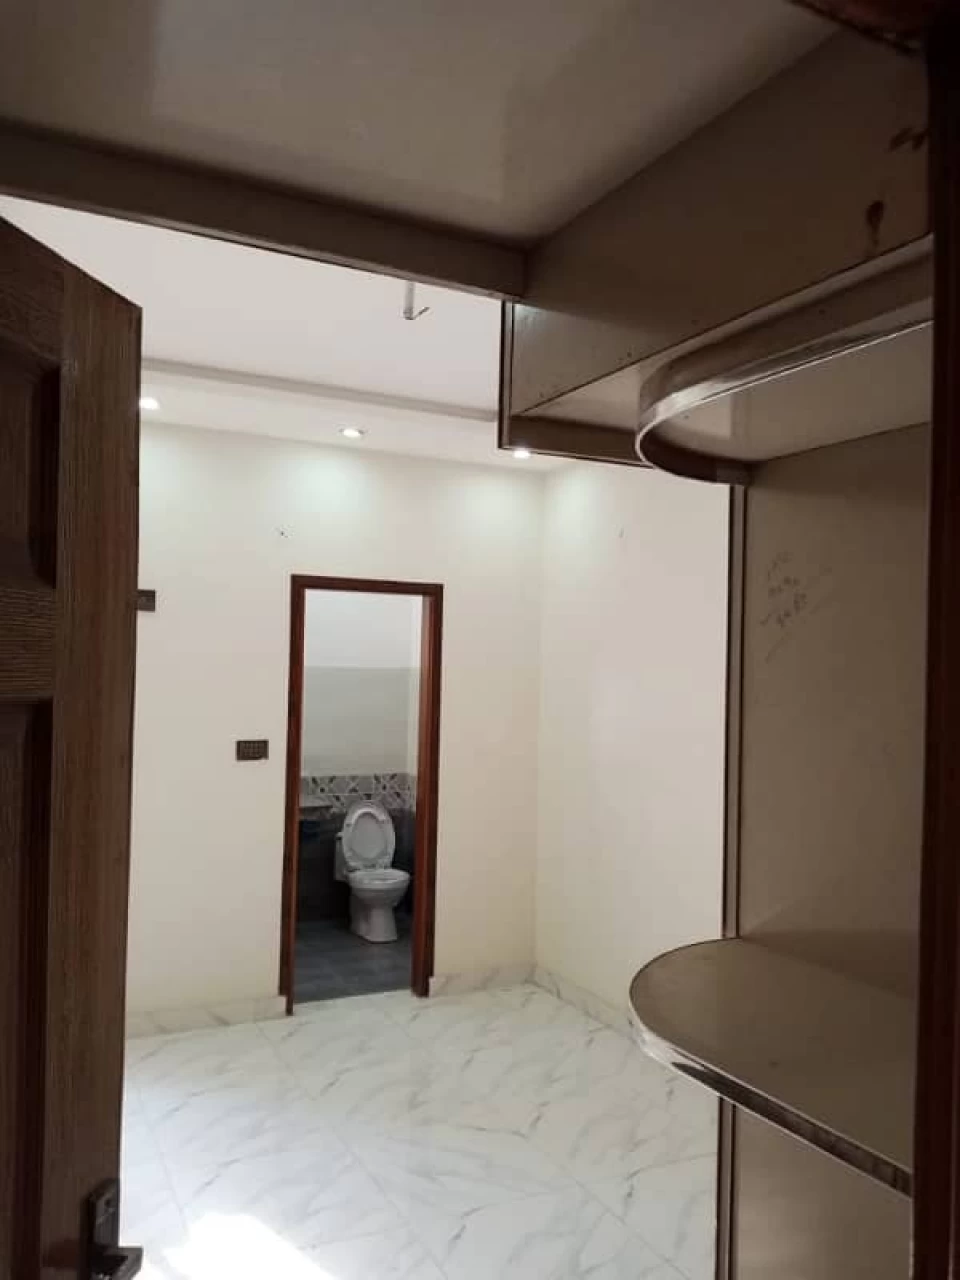 House For Sale in Lahore , House For Sale in Cantt , House For Sale in Cantt Lahore , House For Sale in Cantt , 5 Marla House for Sale In Ghazi road Cantt , Cantt, Lahore Pakistan,5 Bedrooms Bedrooms, 5 Rooms Rooms, 5 BathroomsBathrooms, House,For Sale,2632